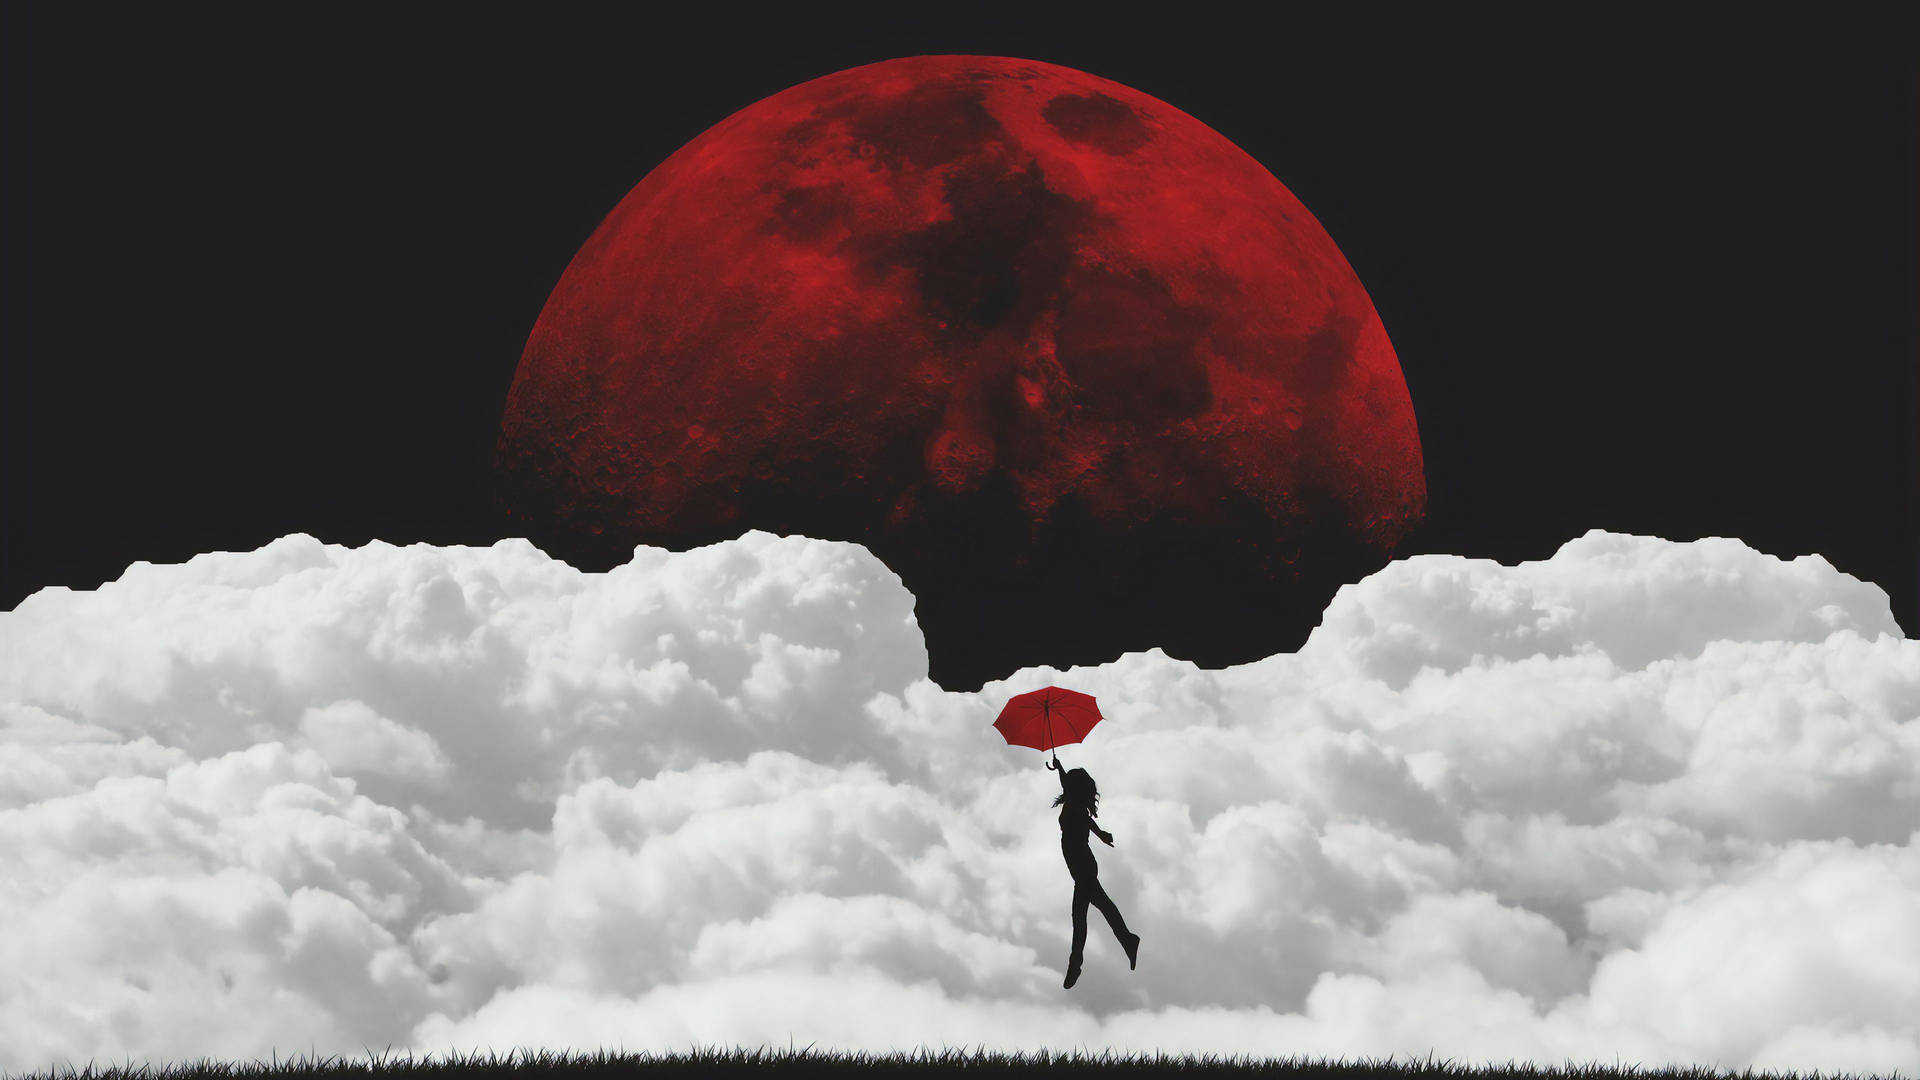 Moon 4k Red Aesthetic Girl With Red Umbrella